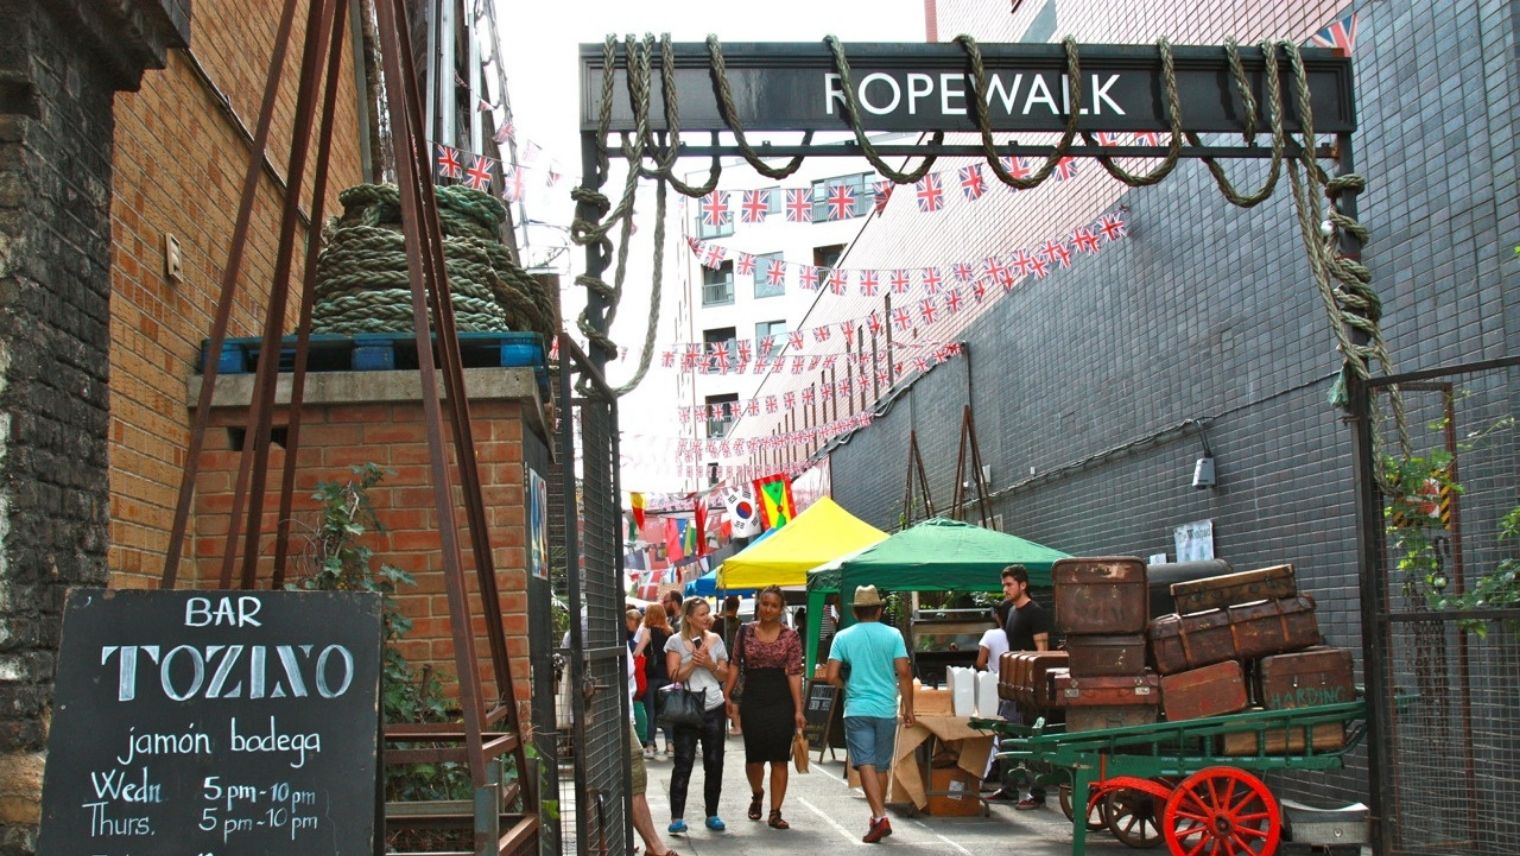 The entrance to Rope Walk and the Maltby Street Market